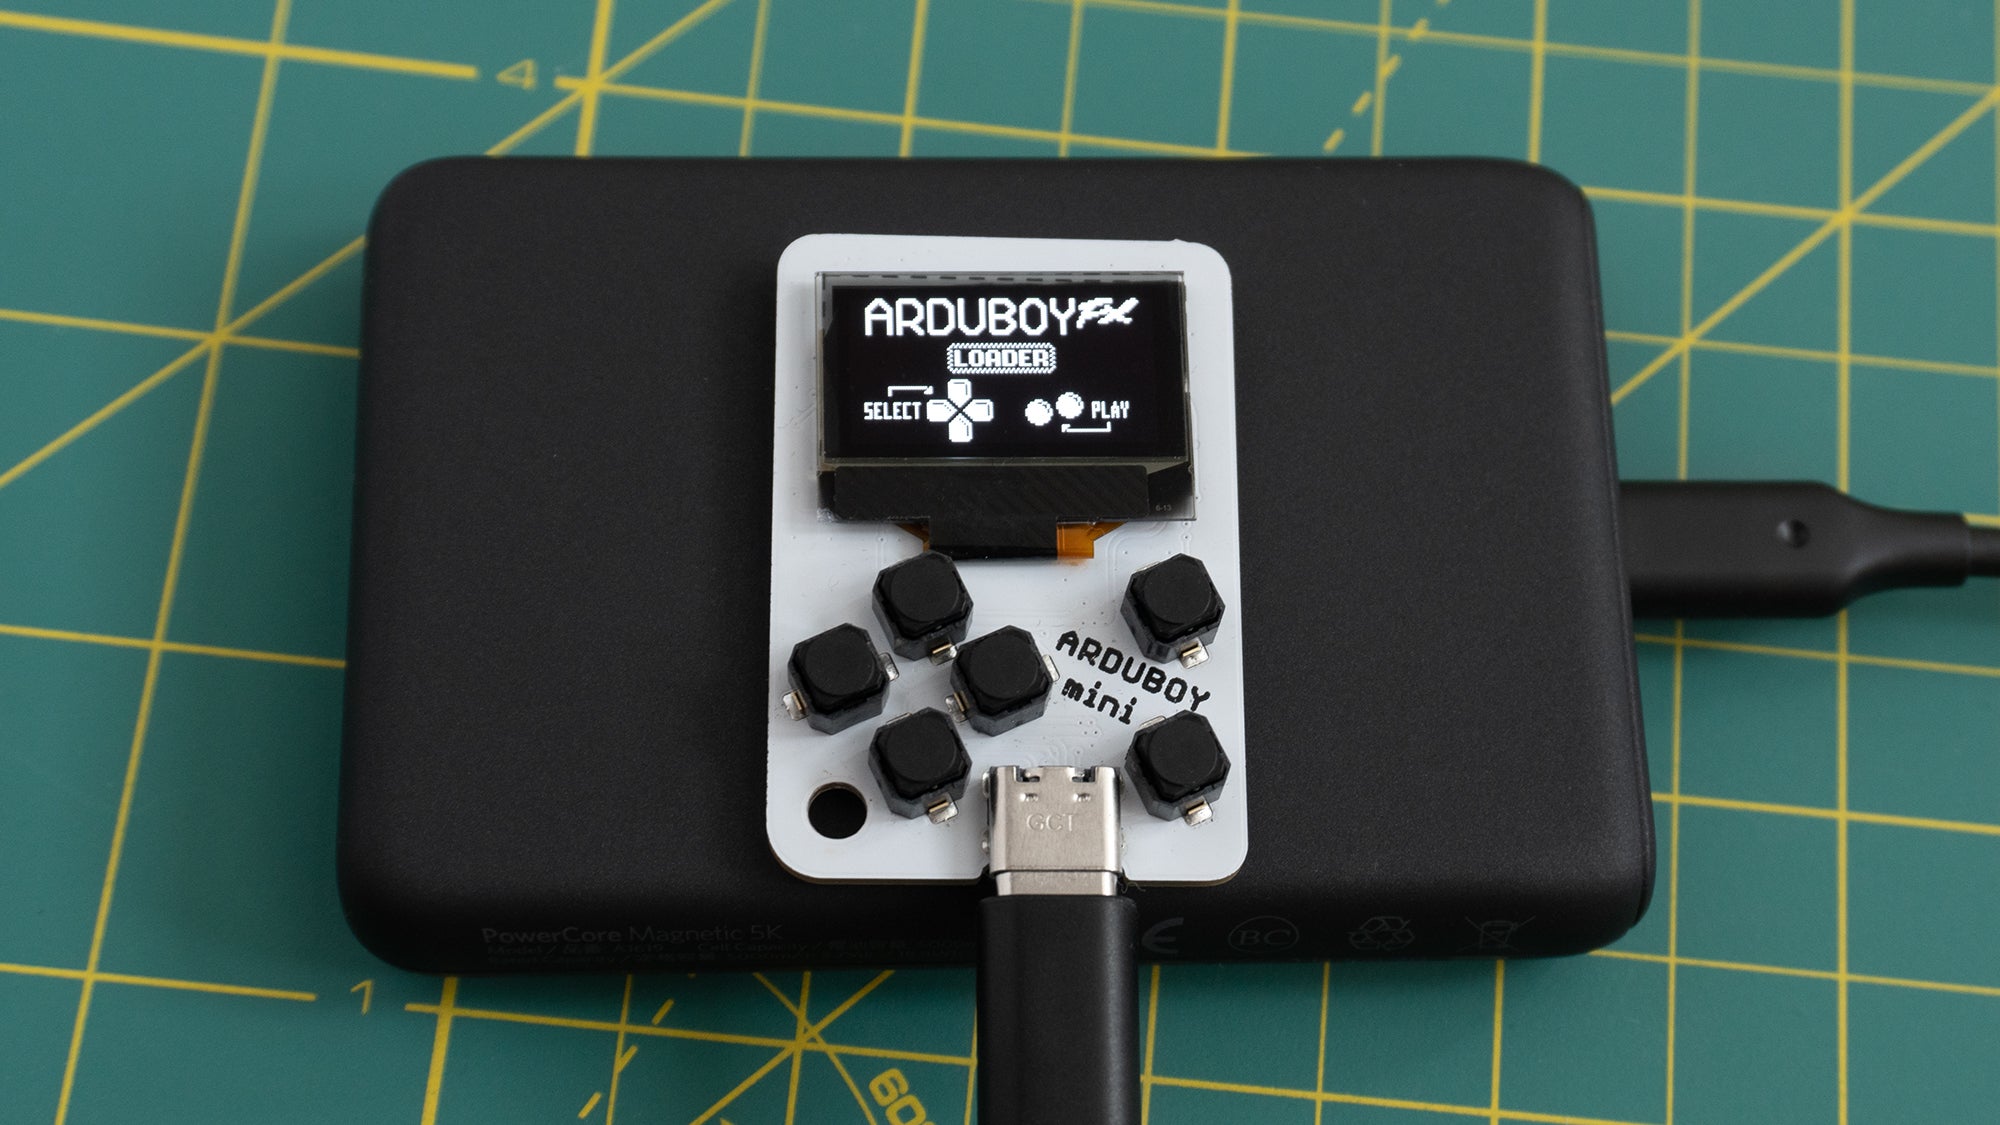 Out of the box you'll need to connect the Arduboy Mini to a power source with a USB-C cable. (Photo: Andrew Liszewski | Gizmodo)